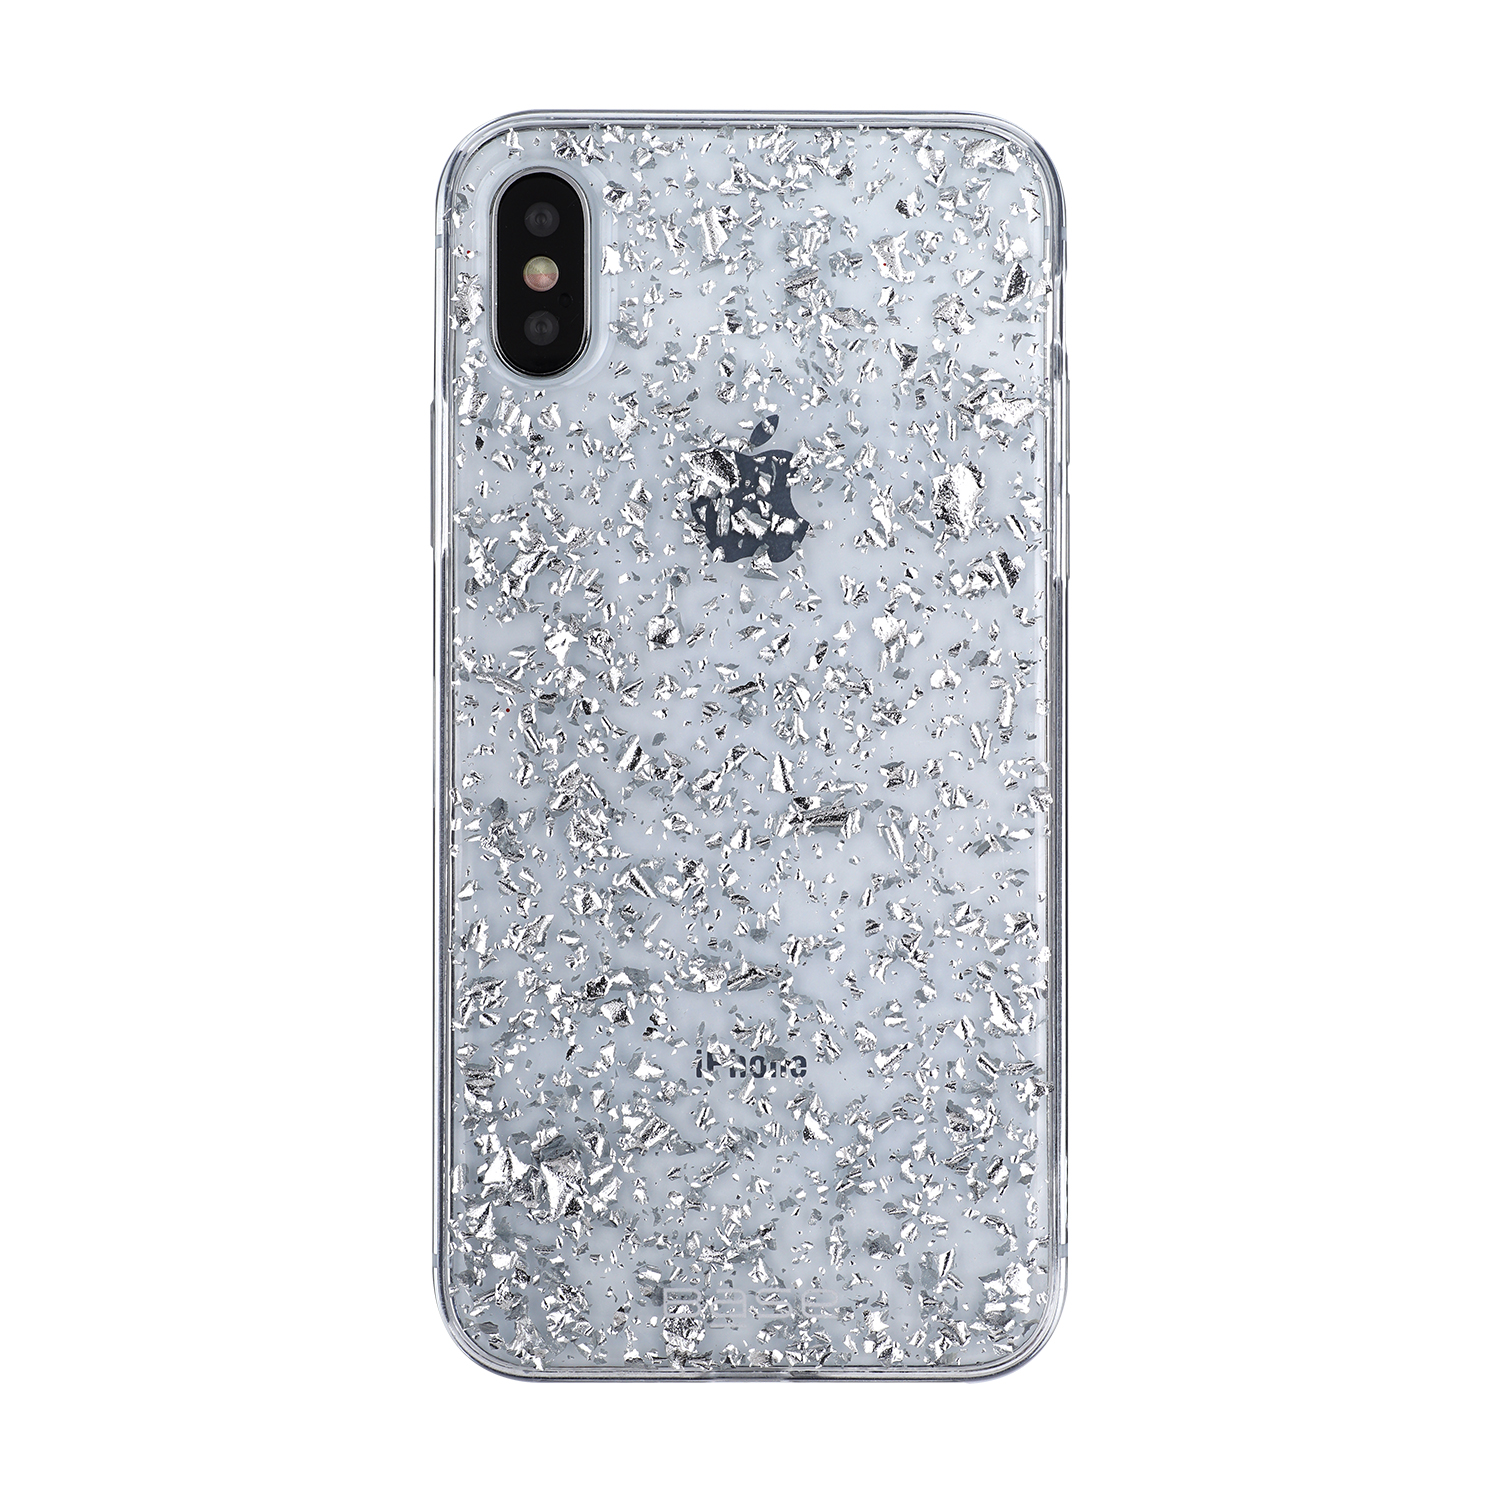 Base CharismaGlimmer - Glimmering Protective Case for iPhone X - Silver